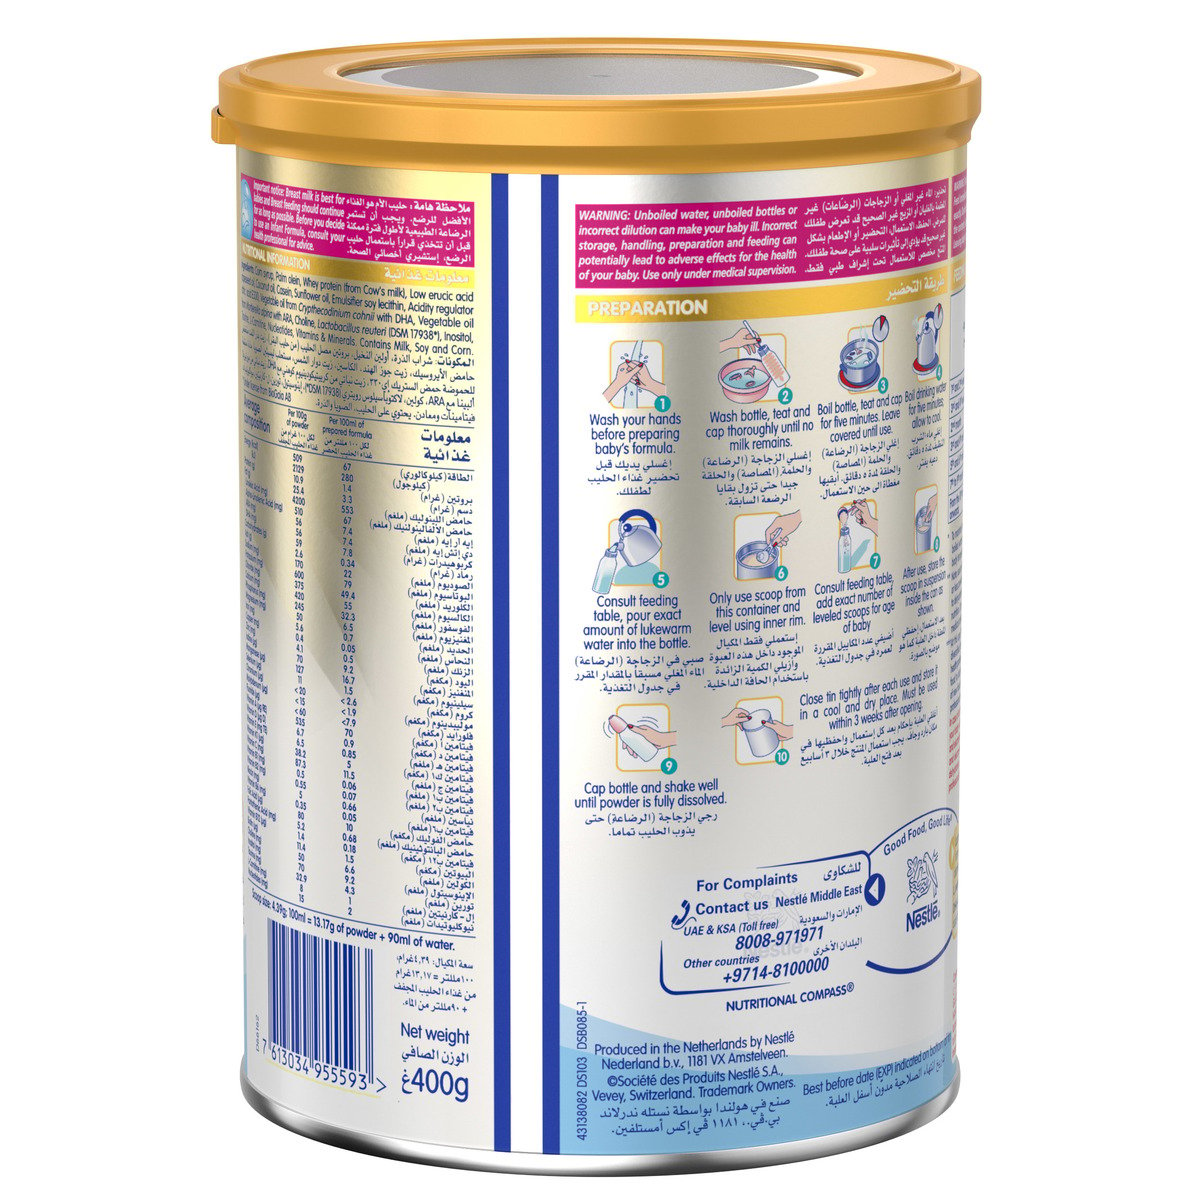 Nestle NAN L.F. Lactose Free Infant Formula From Birth to 12 Months 400 g